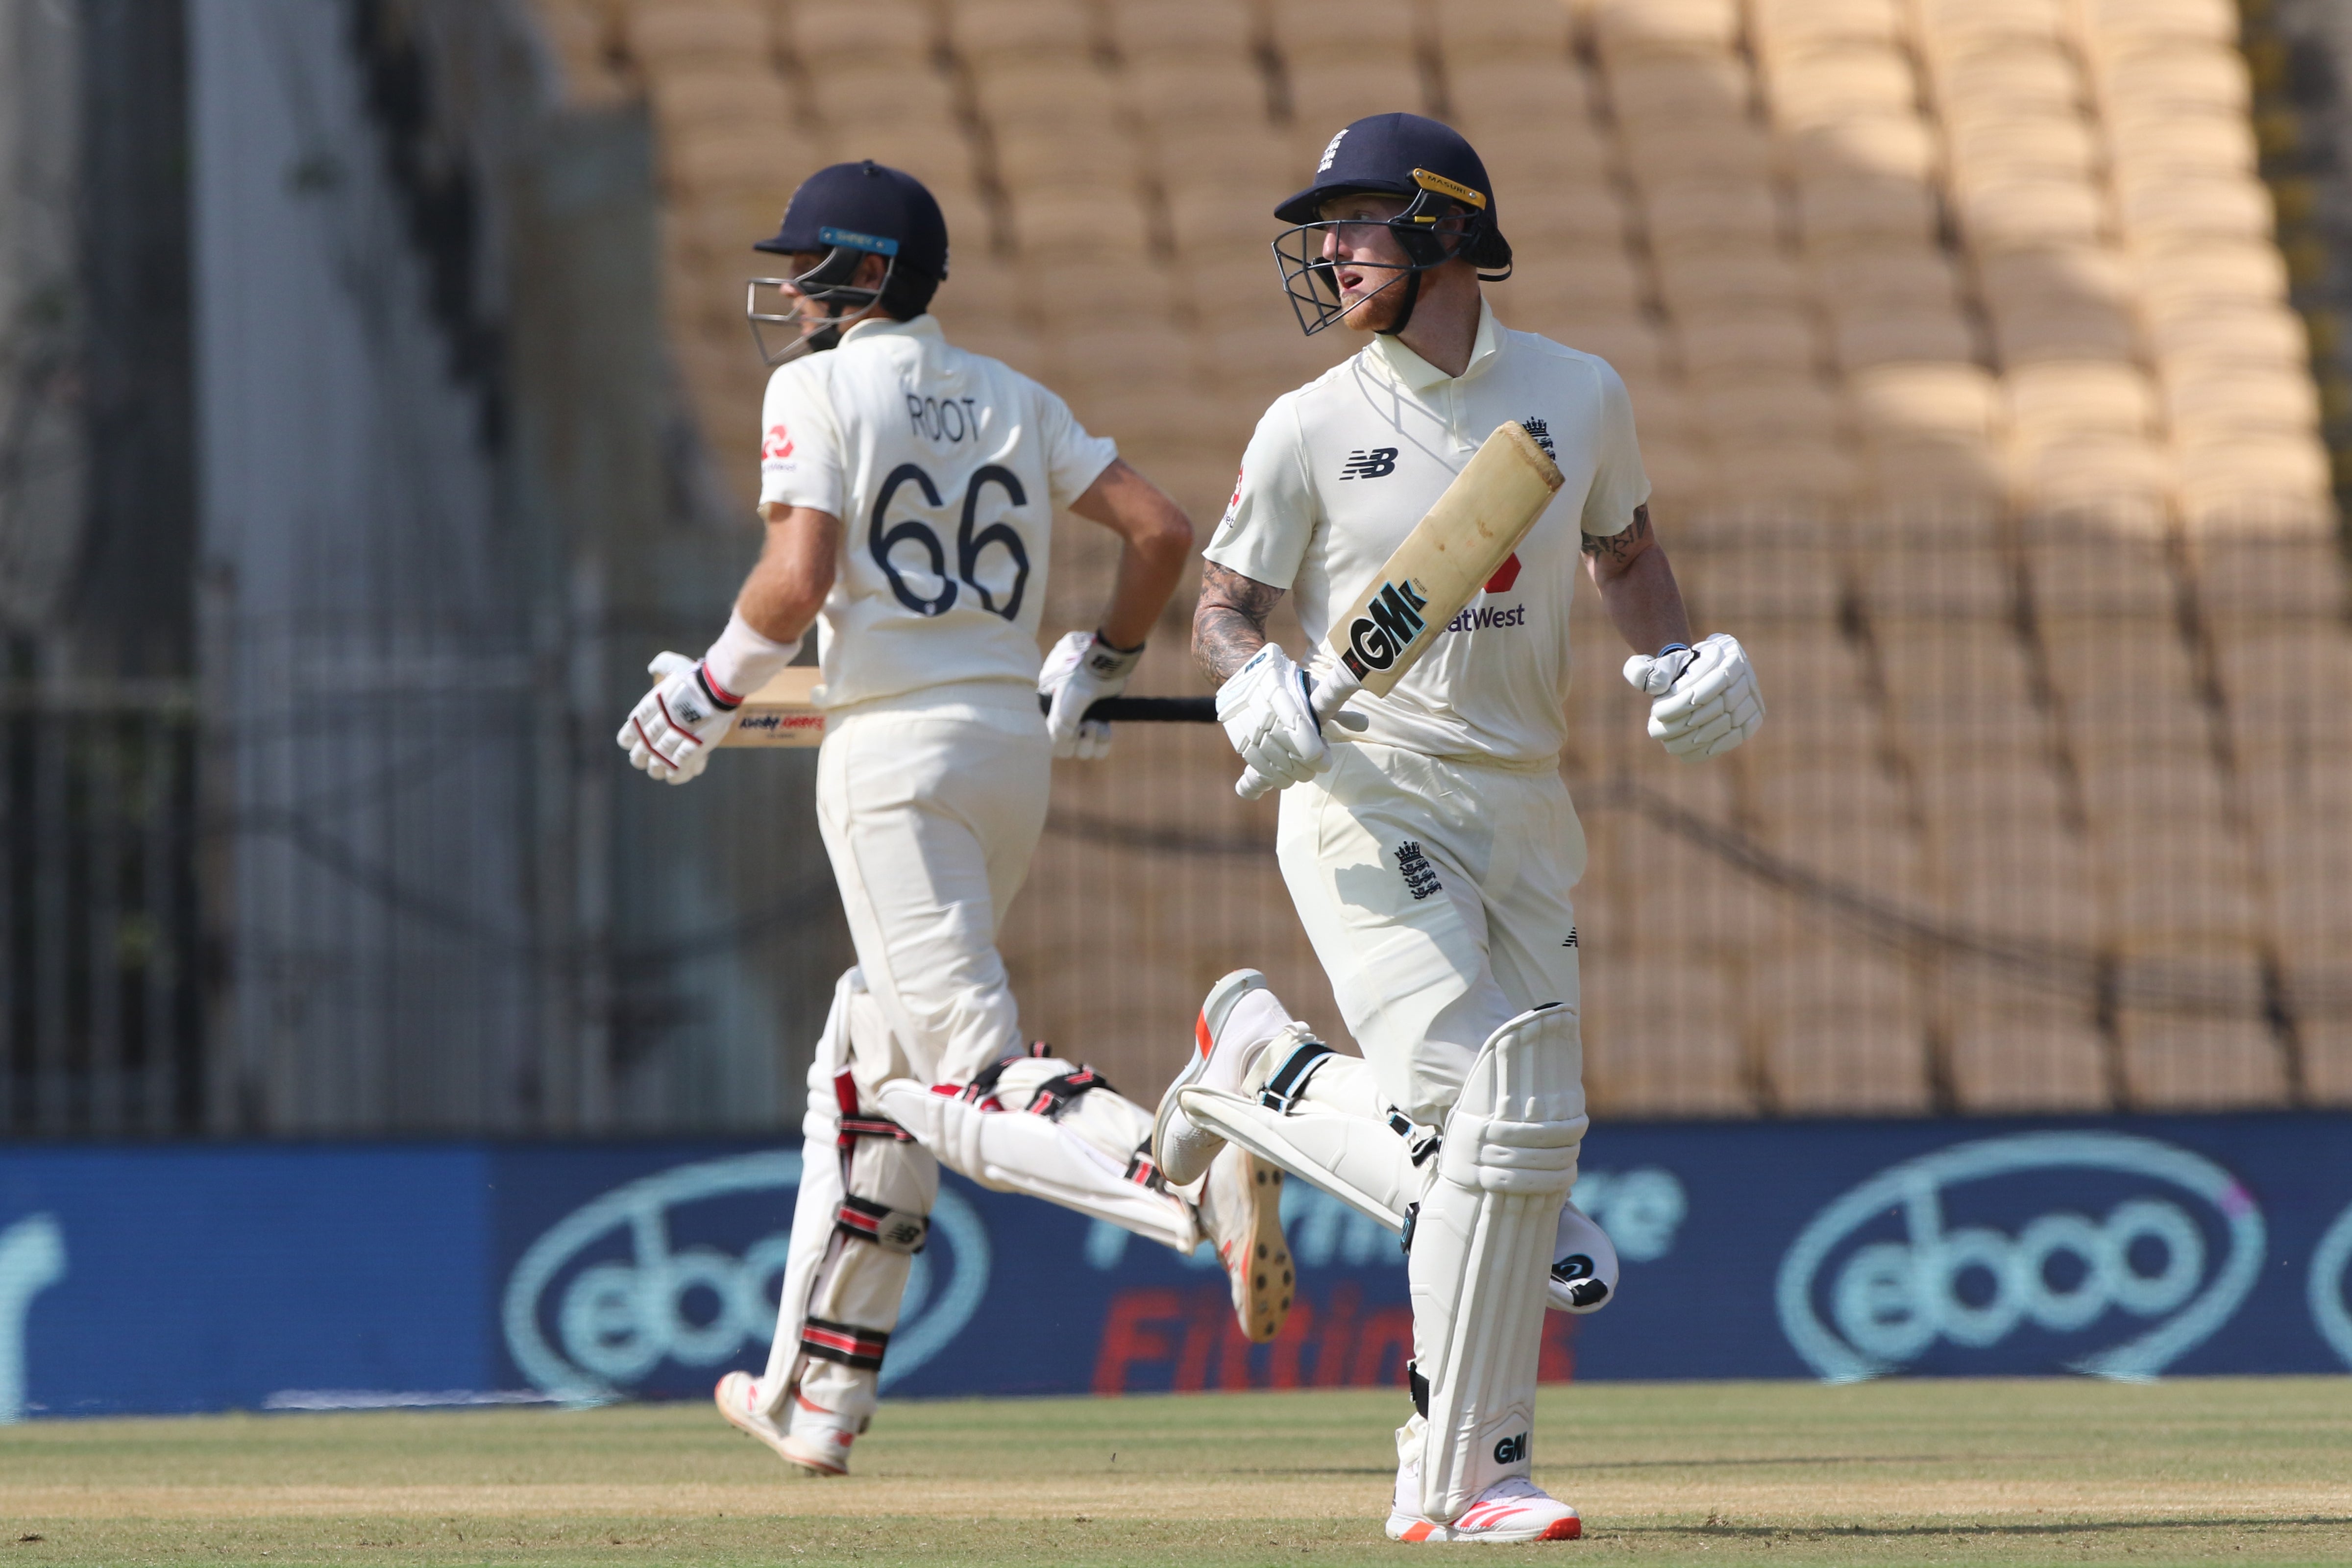 Ben Stokes and Joe Root run between the stumps during day two of the first test match between India and England in Chennai